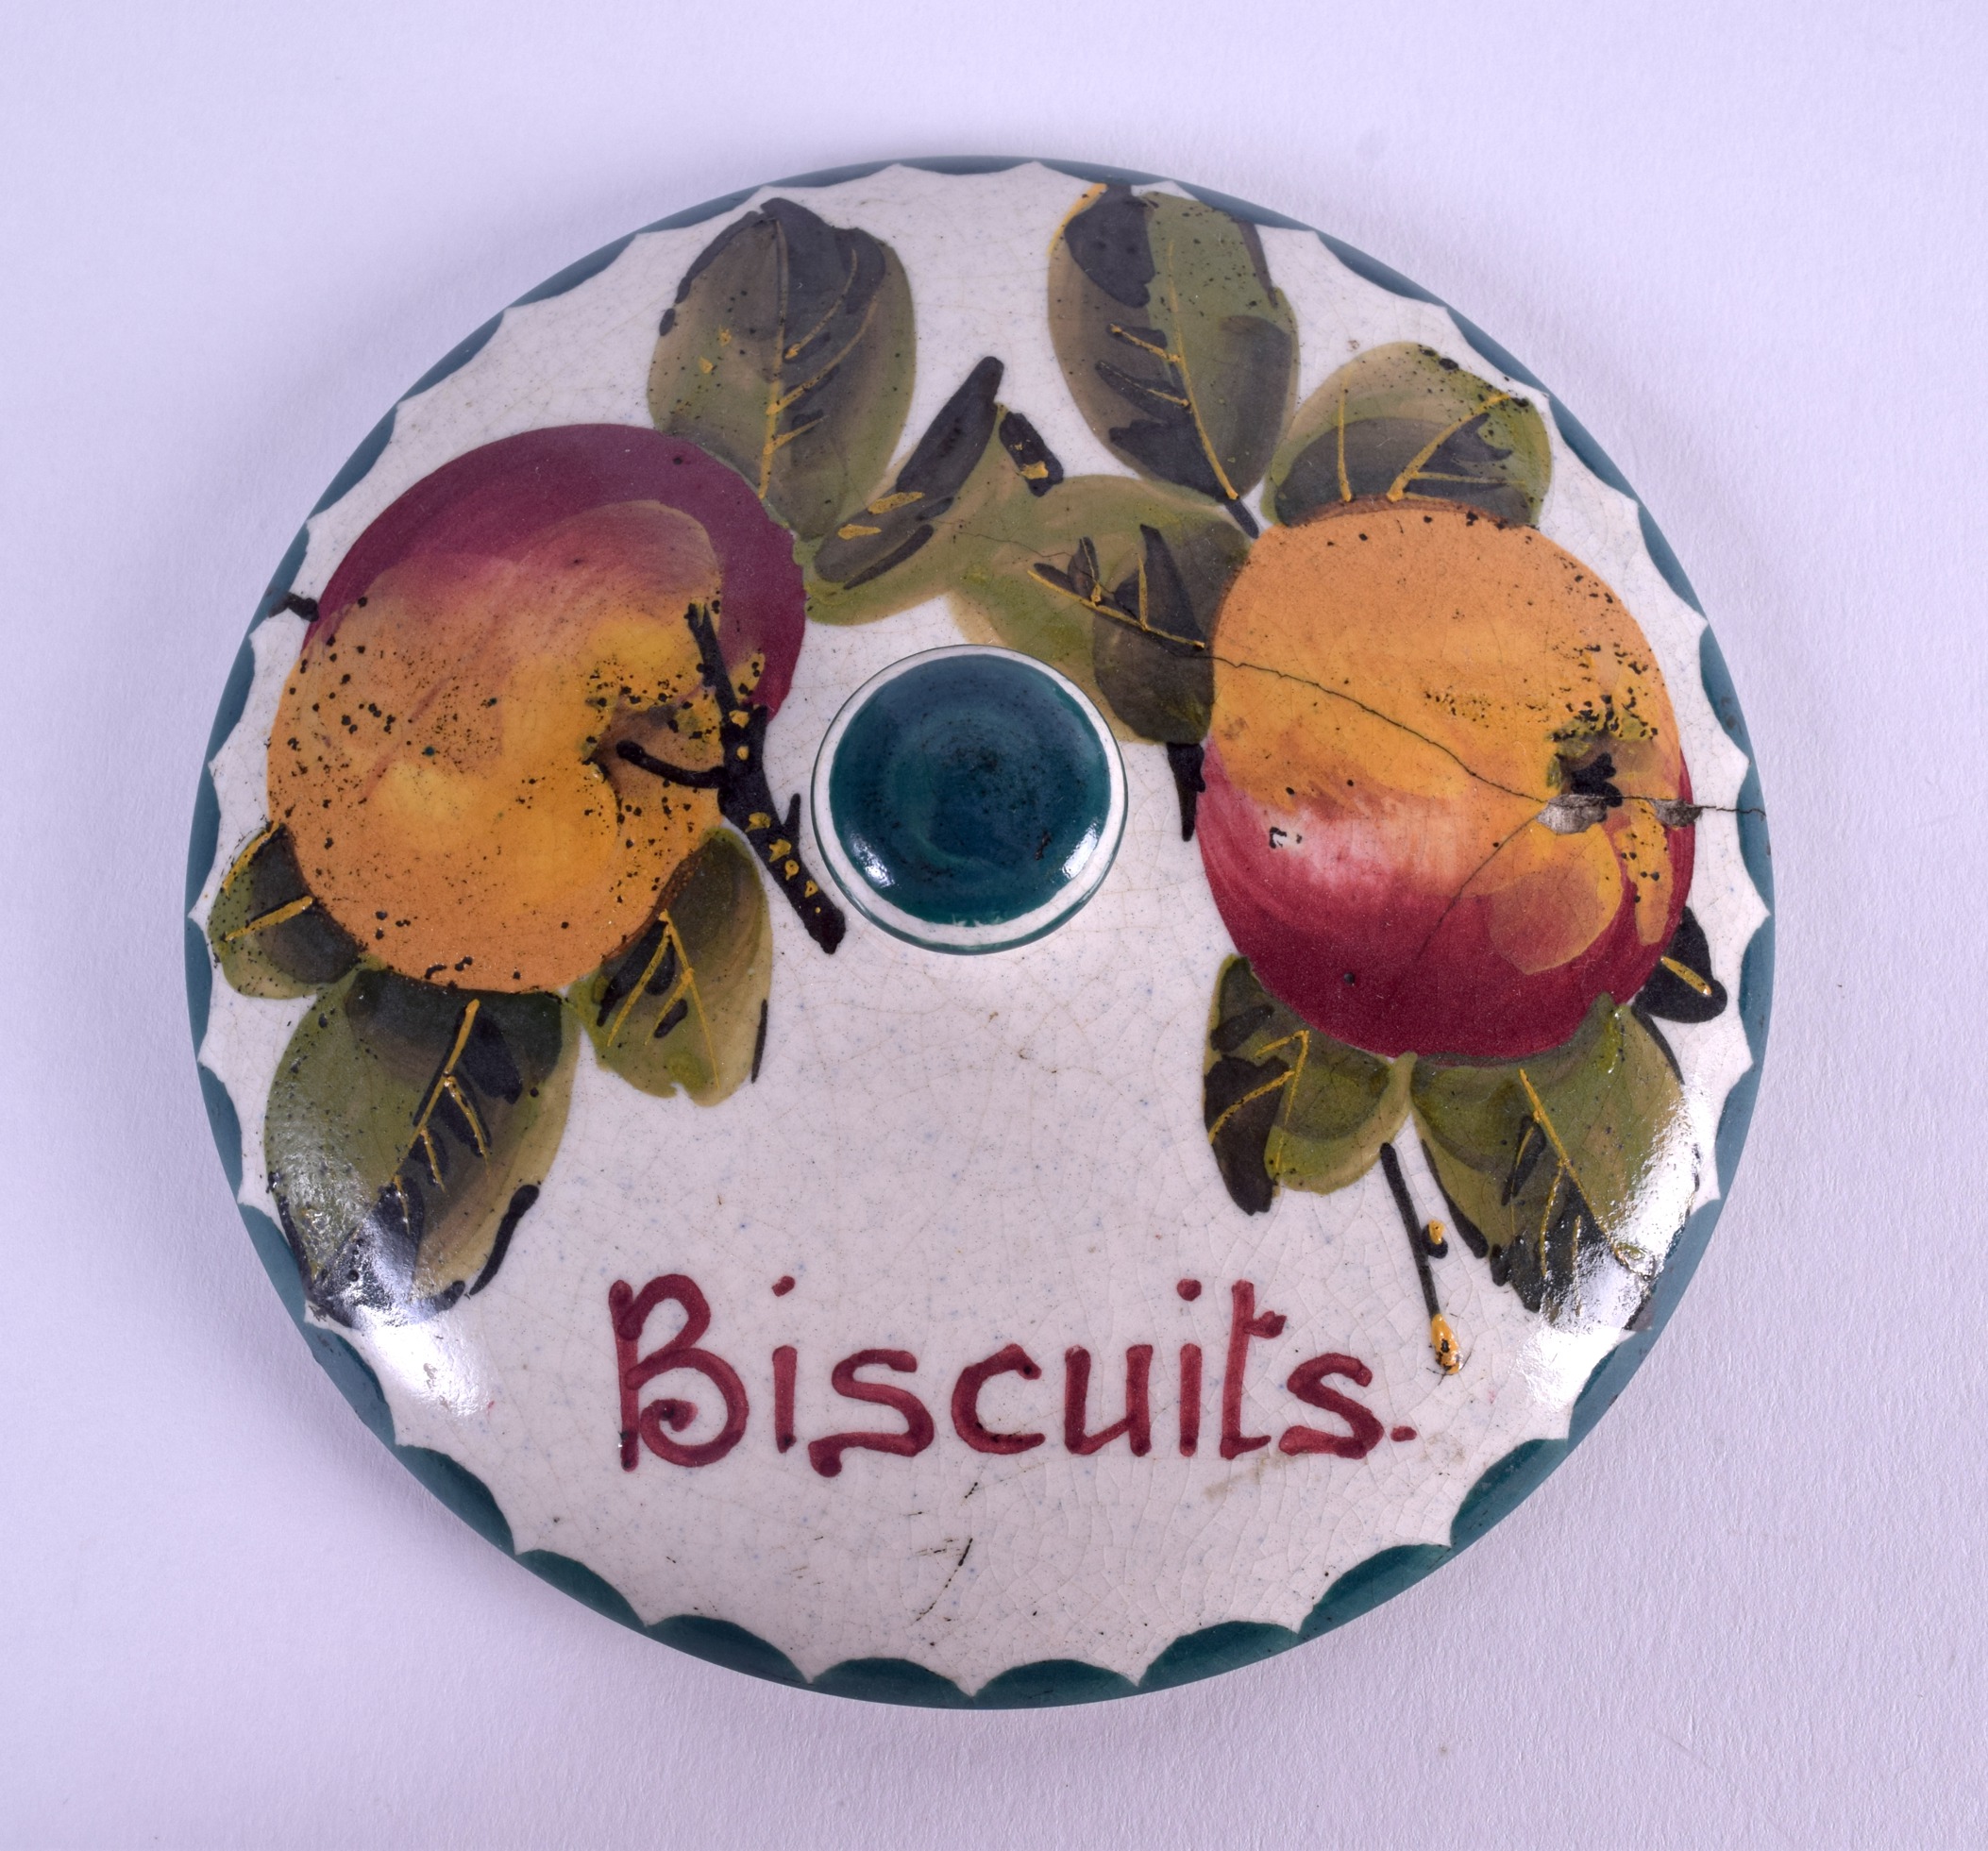 A SCOTTISH WEMYSS POTTERY BISCUIT BOX AND COVER painted with fruit. 13 cm x 9 cm. - Image 3 of 5